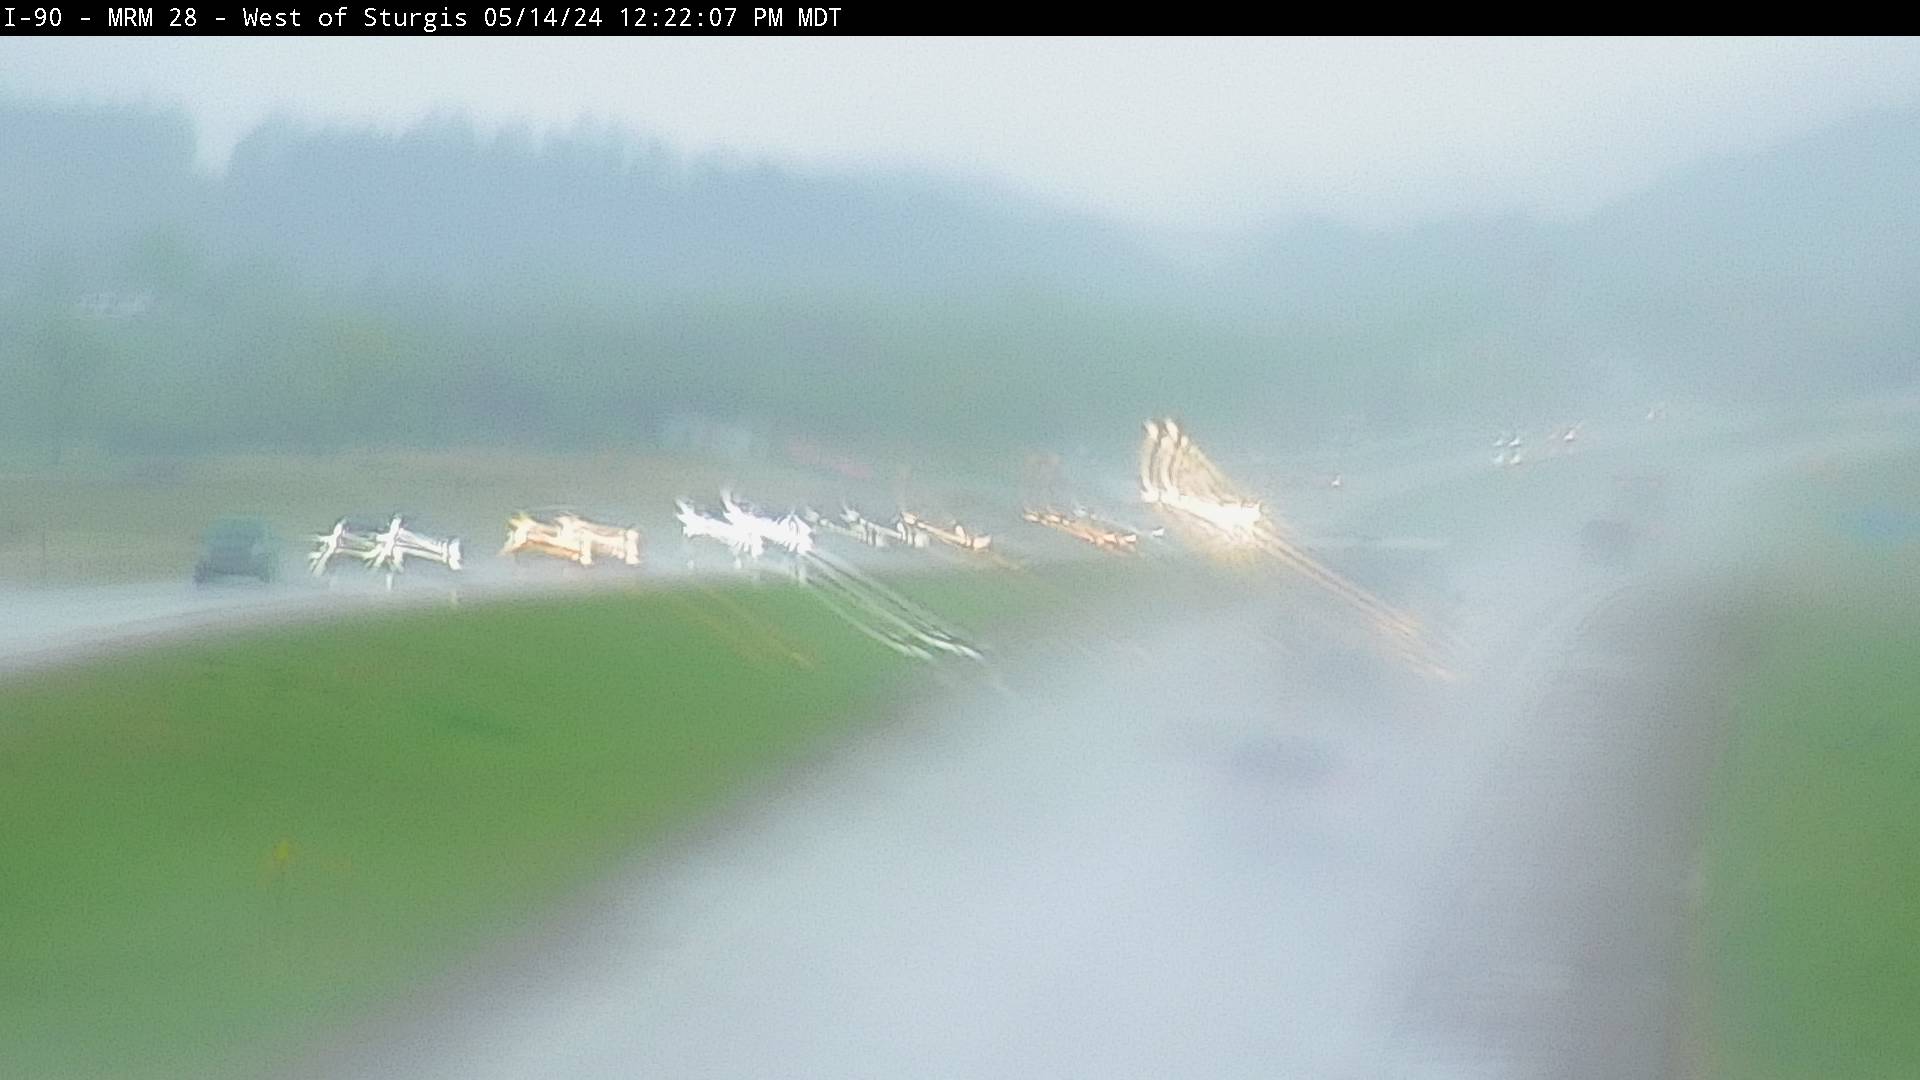 West of town along I-90 @ MP 28.6 - East Traffic Camera